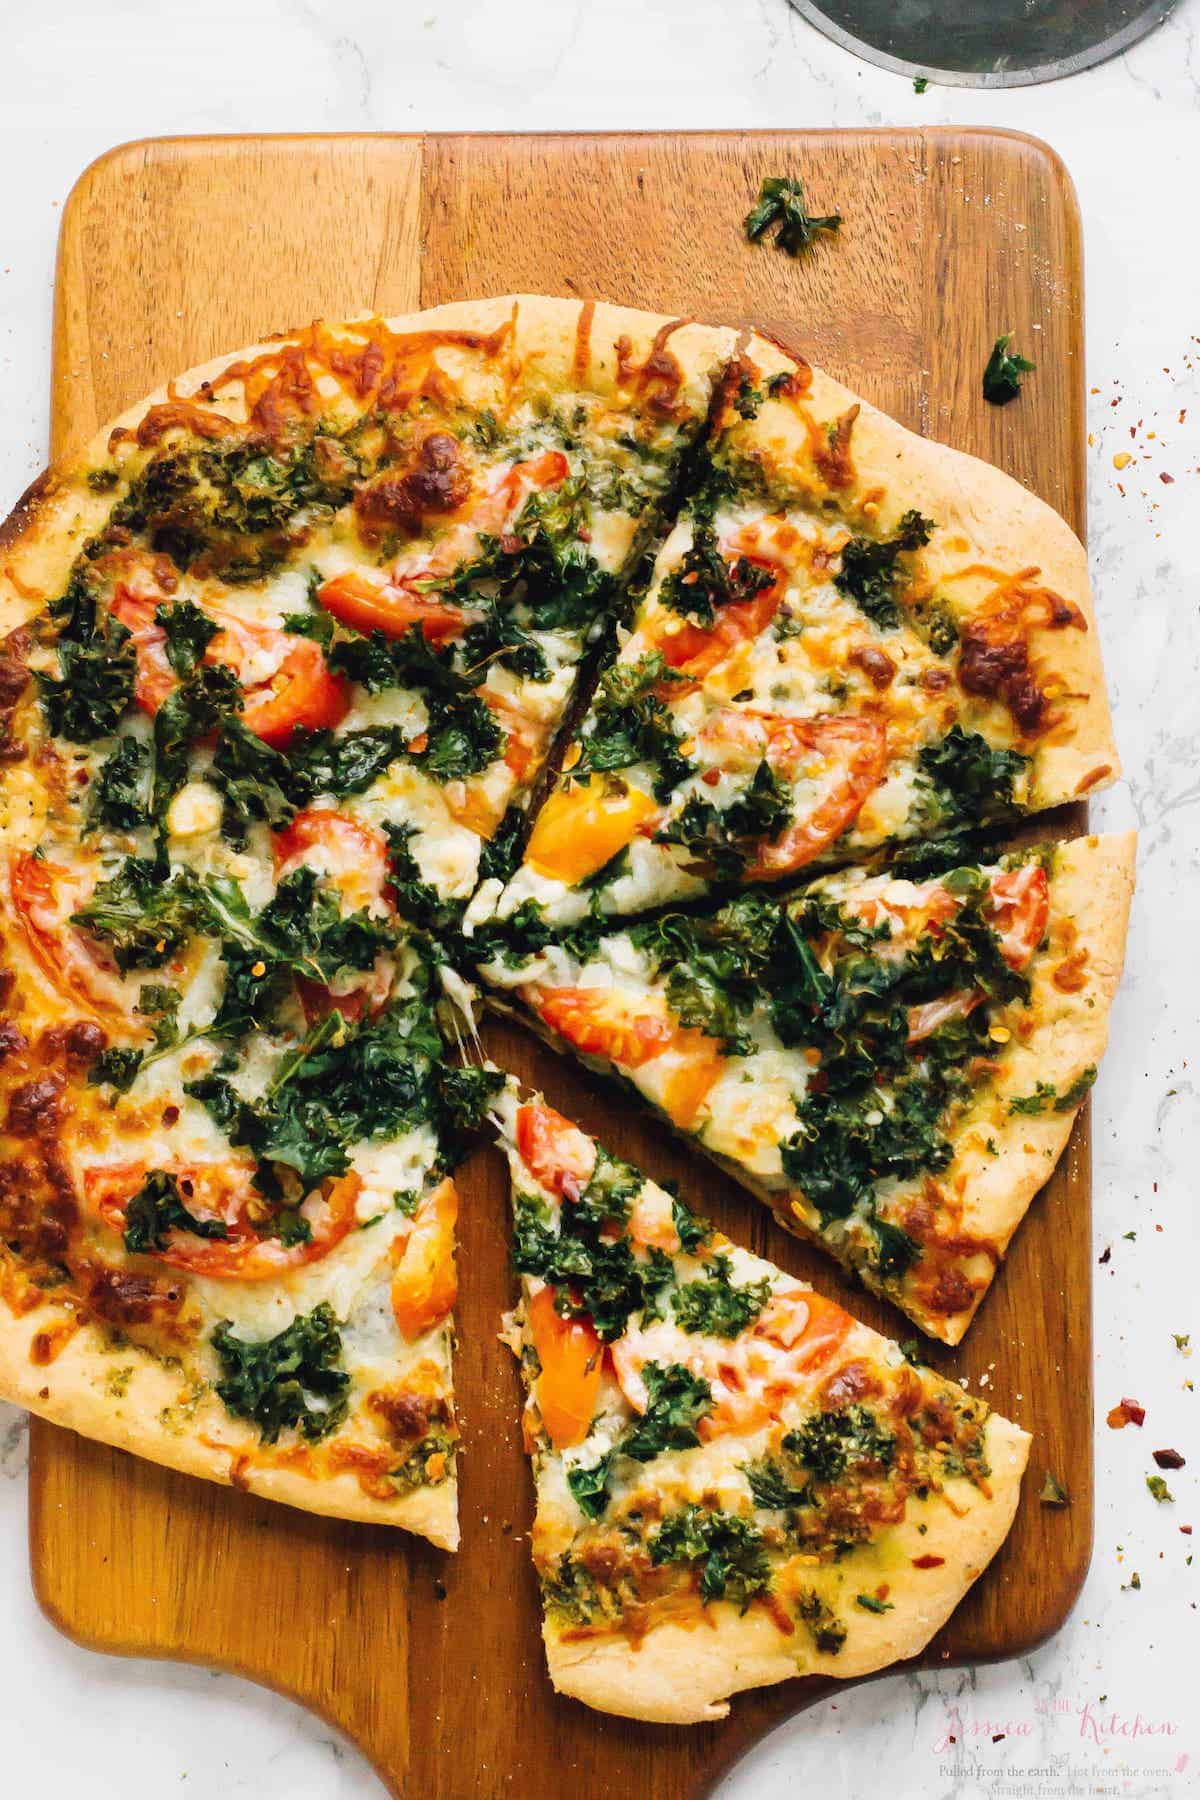 Overhead view of kale pizza on wood cutting board